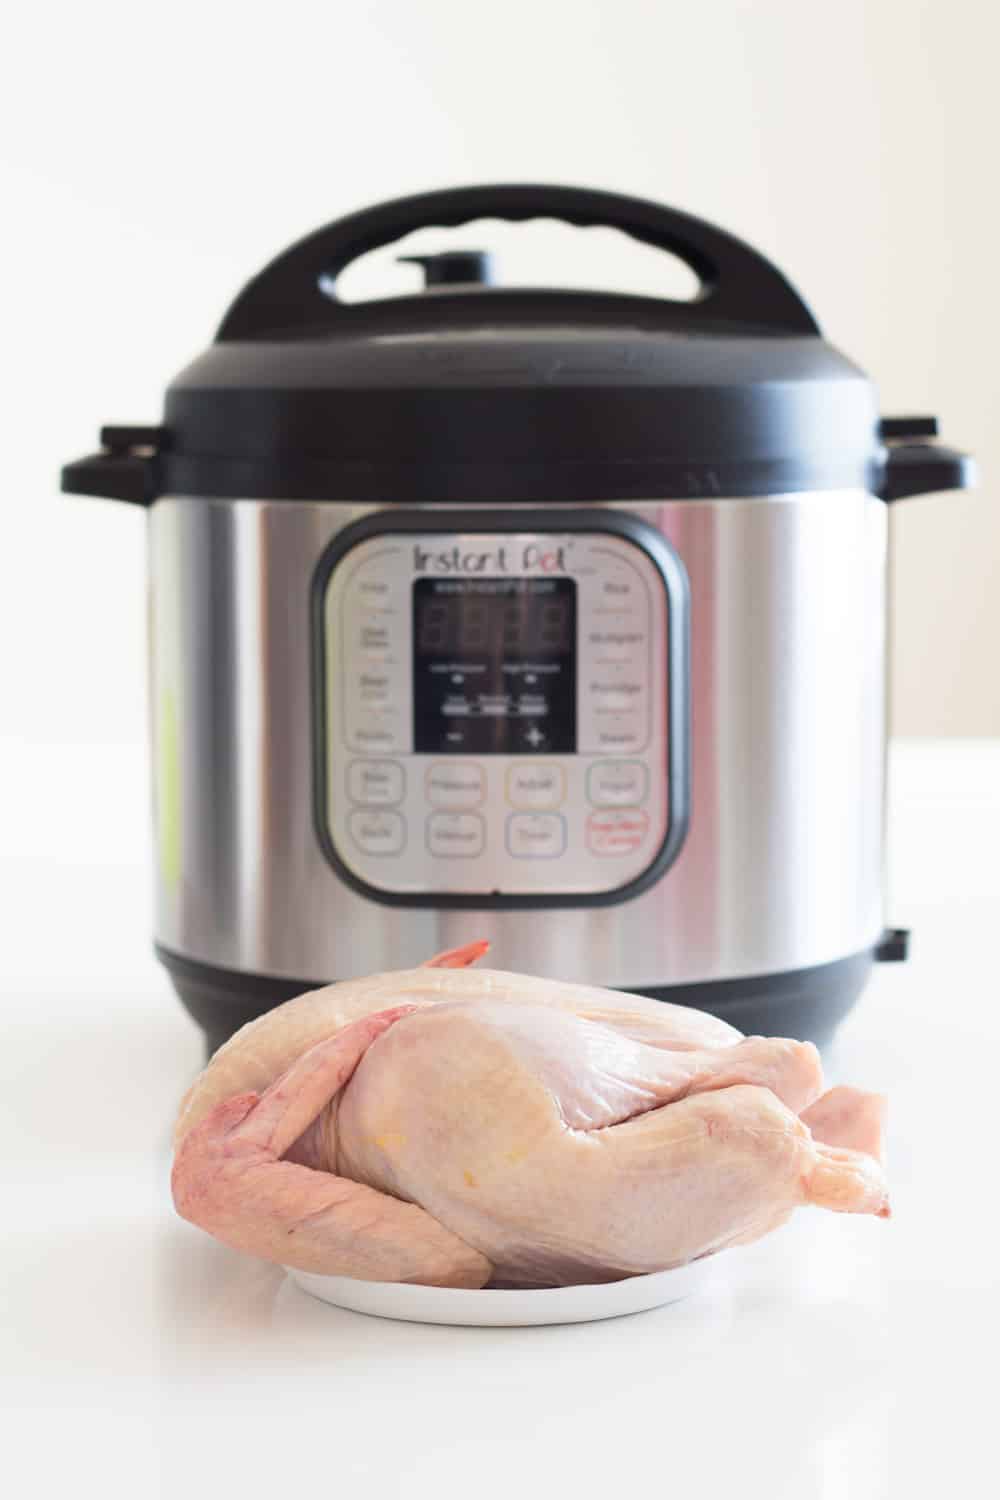 A whole chicken on a plate in front of an Instant Pot